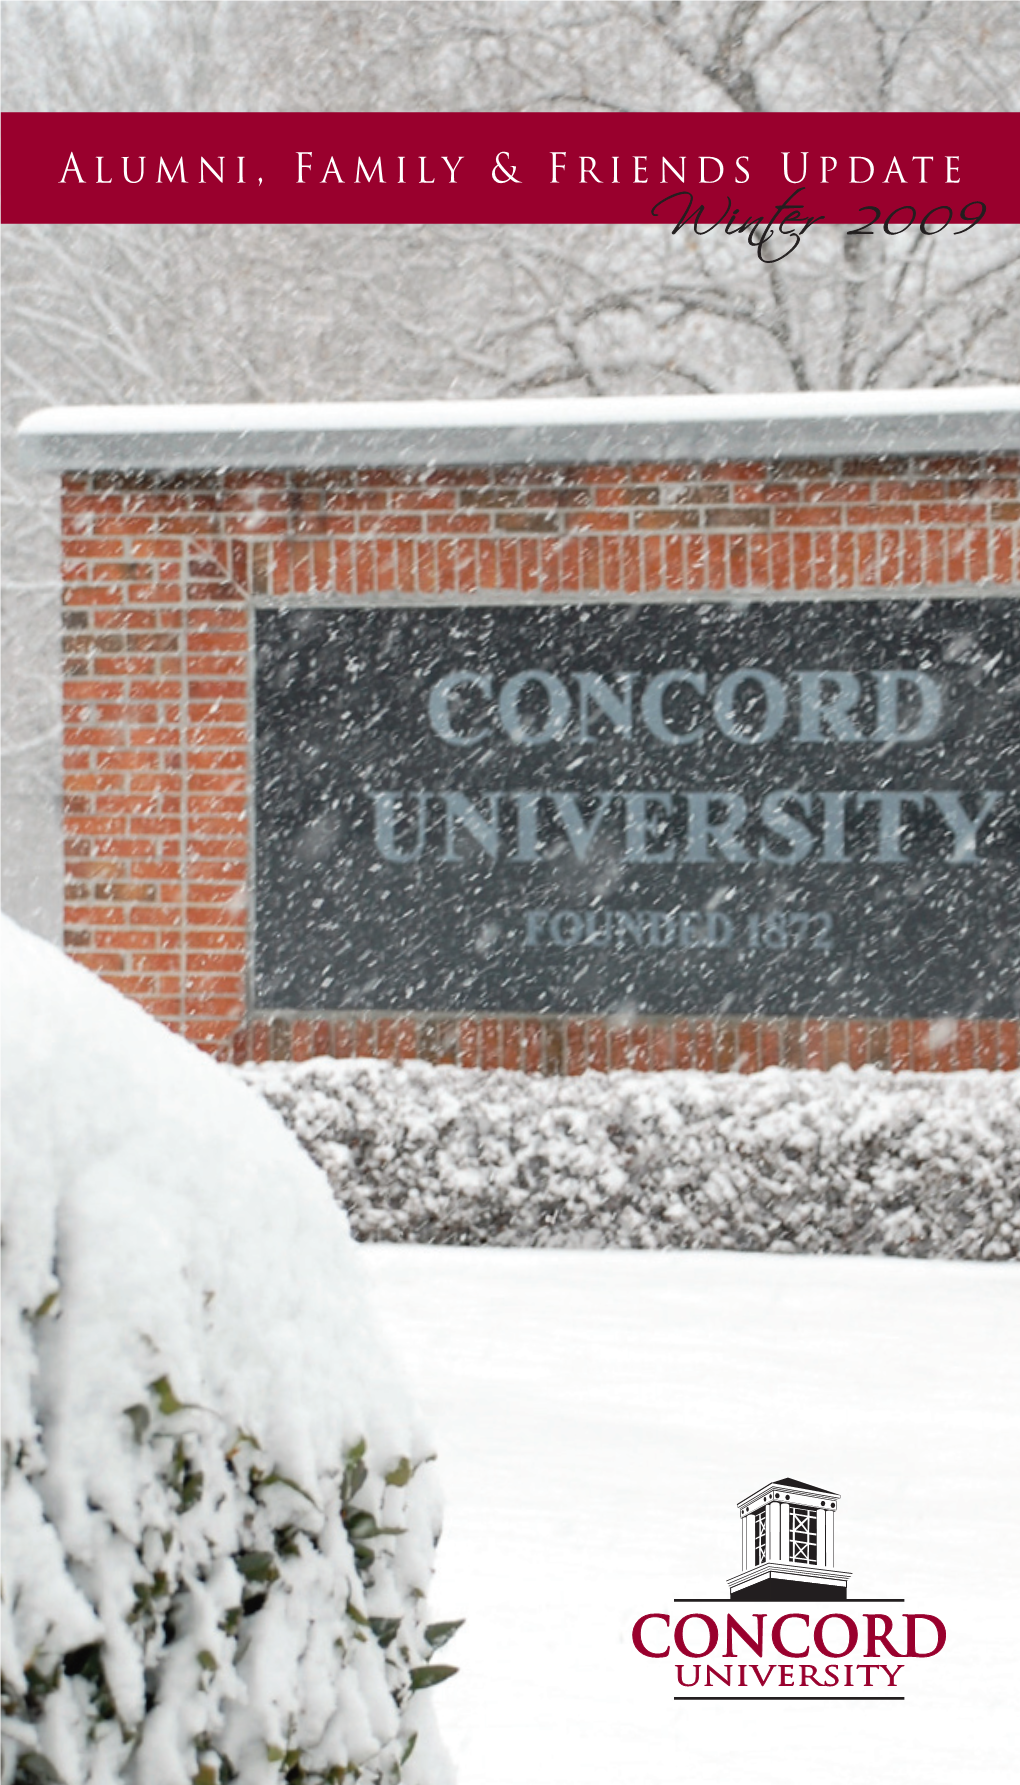 Winter 2009 from the President’S Desk: the Faculty, Staff, and Students of Concord University Wish You the Warmest of Season’S Greetings